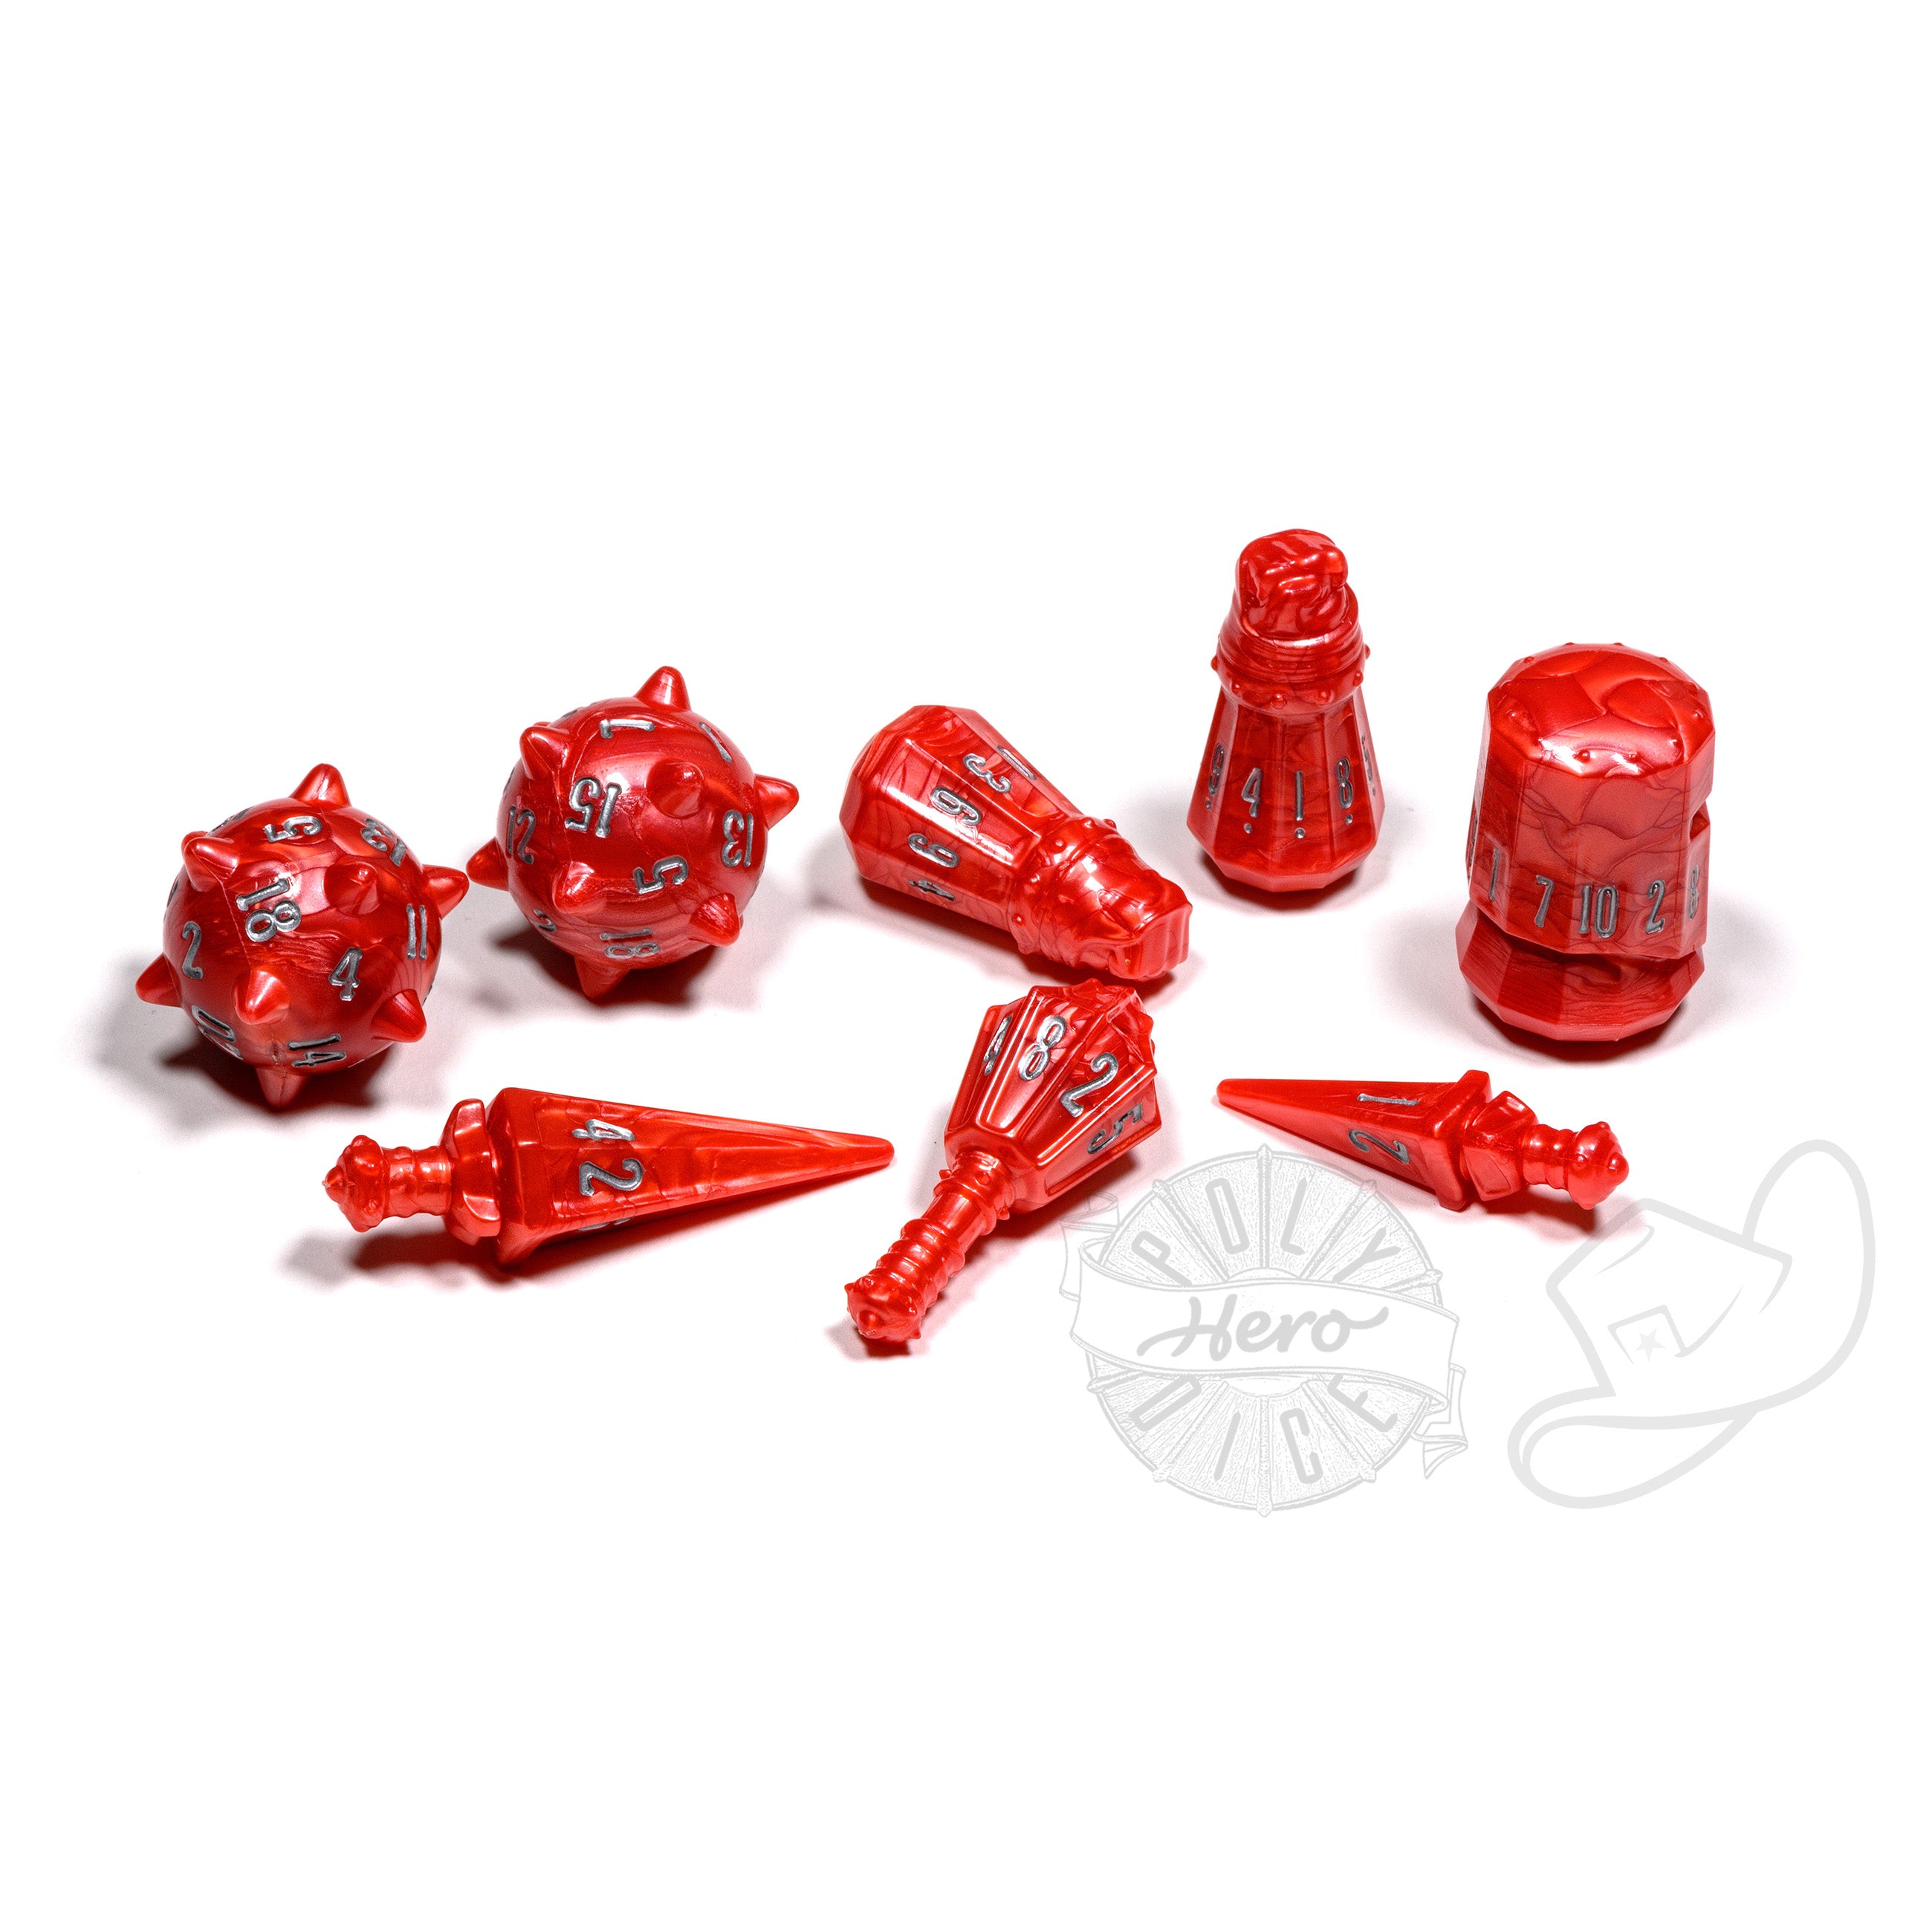 Products PolyHero Warrior 8 Dice roleplaying Set crimson carnage